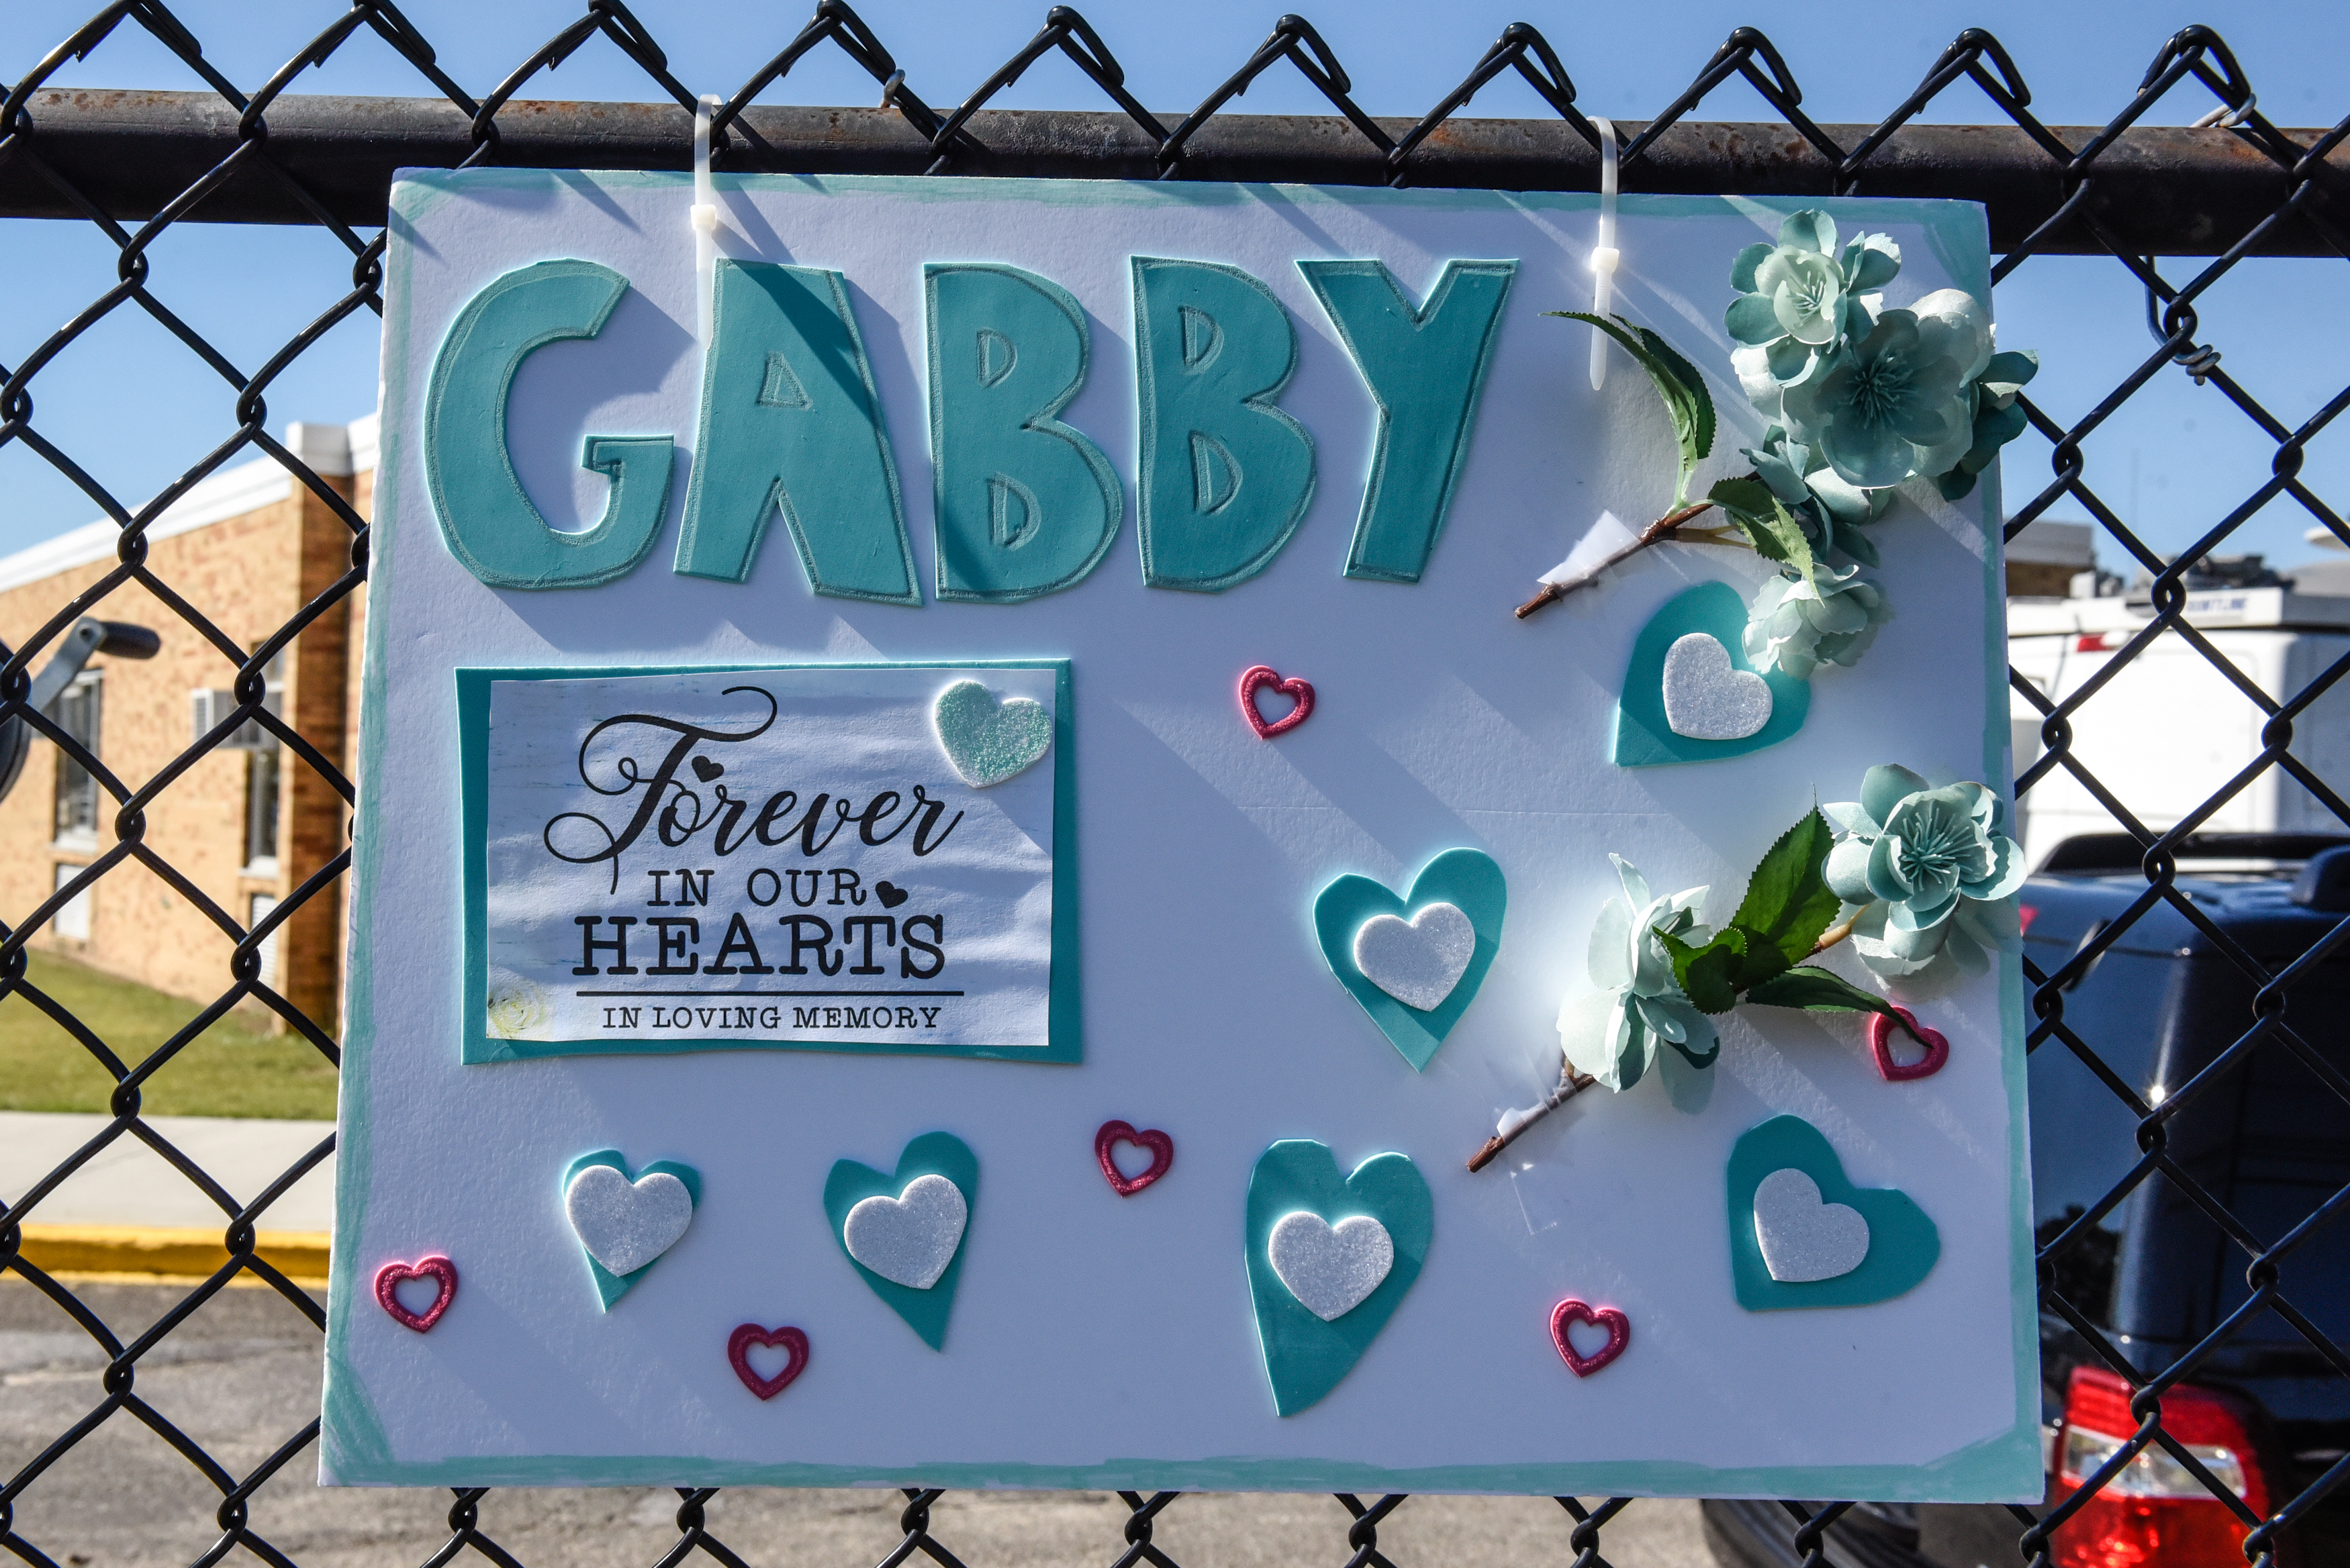 A homemade sign covered in hearts and flowers reads, “Gabby, forever in our hearts.”